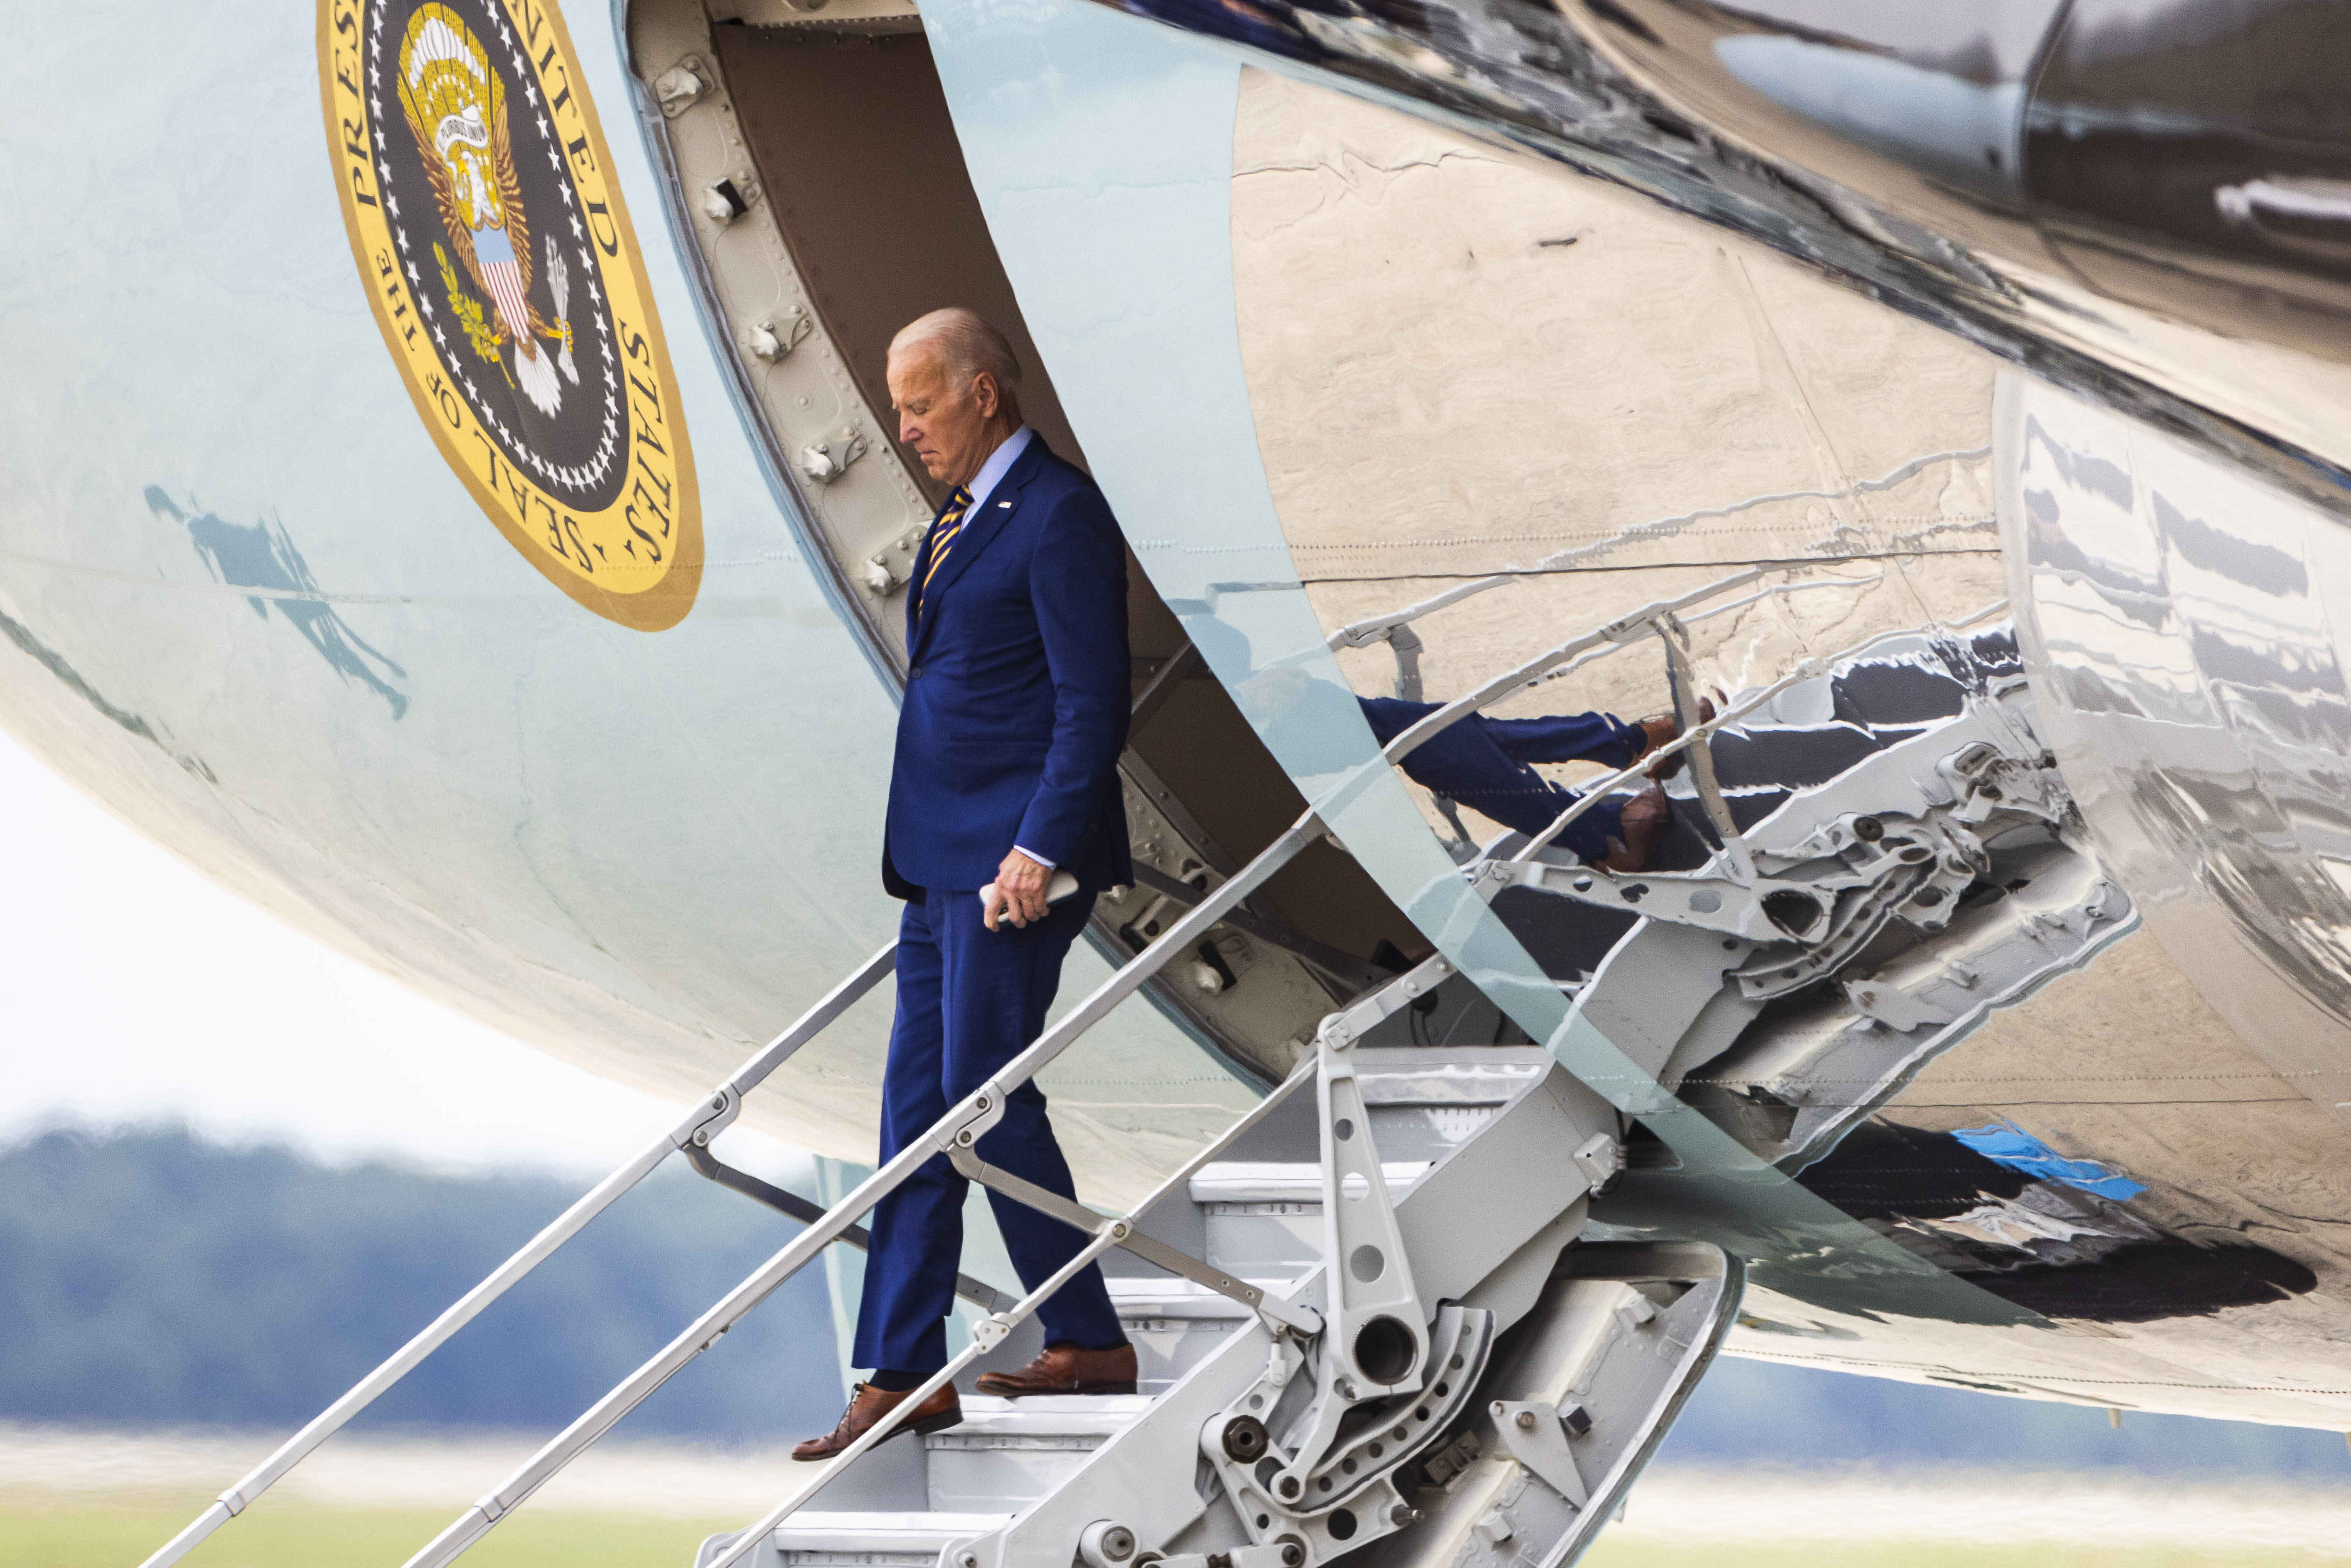 Finland is preparing a large-scale security operation before Biden’s visit